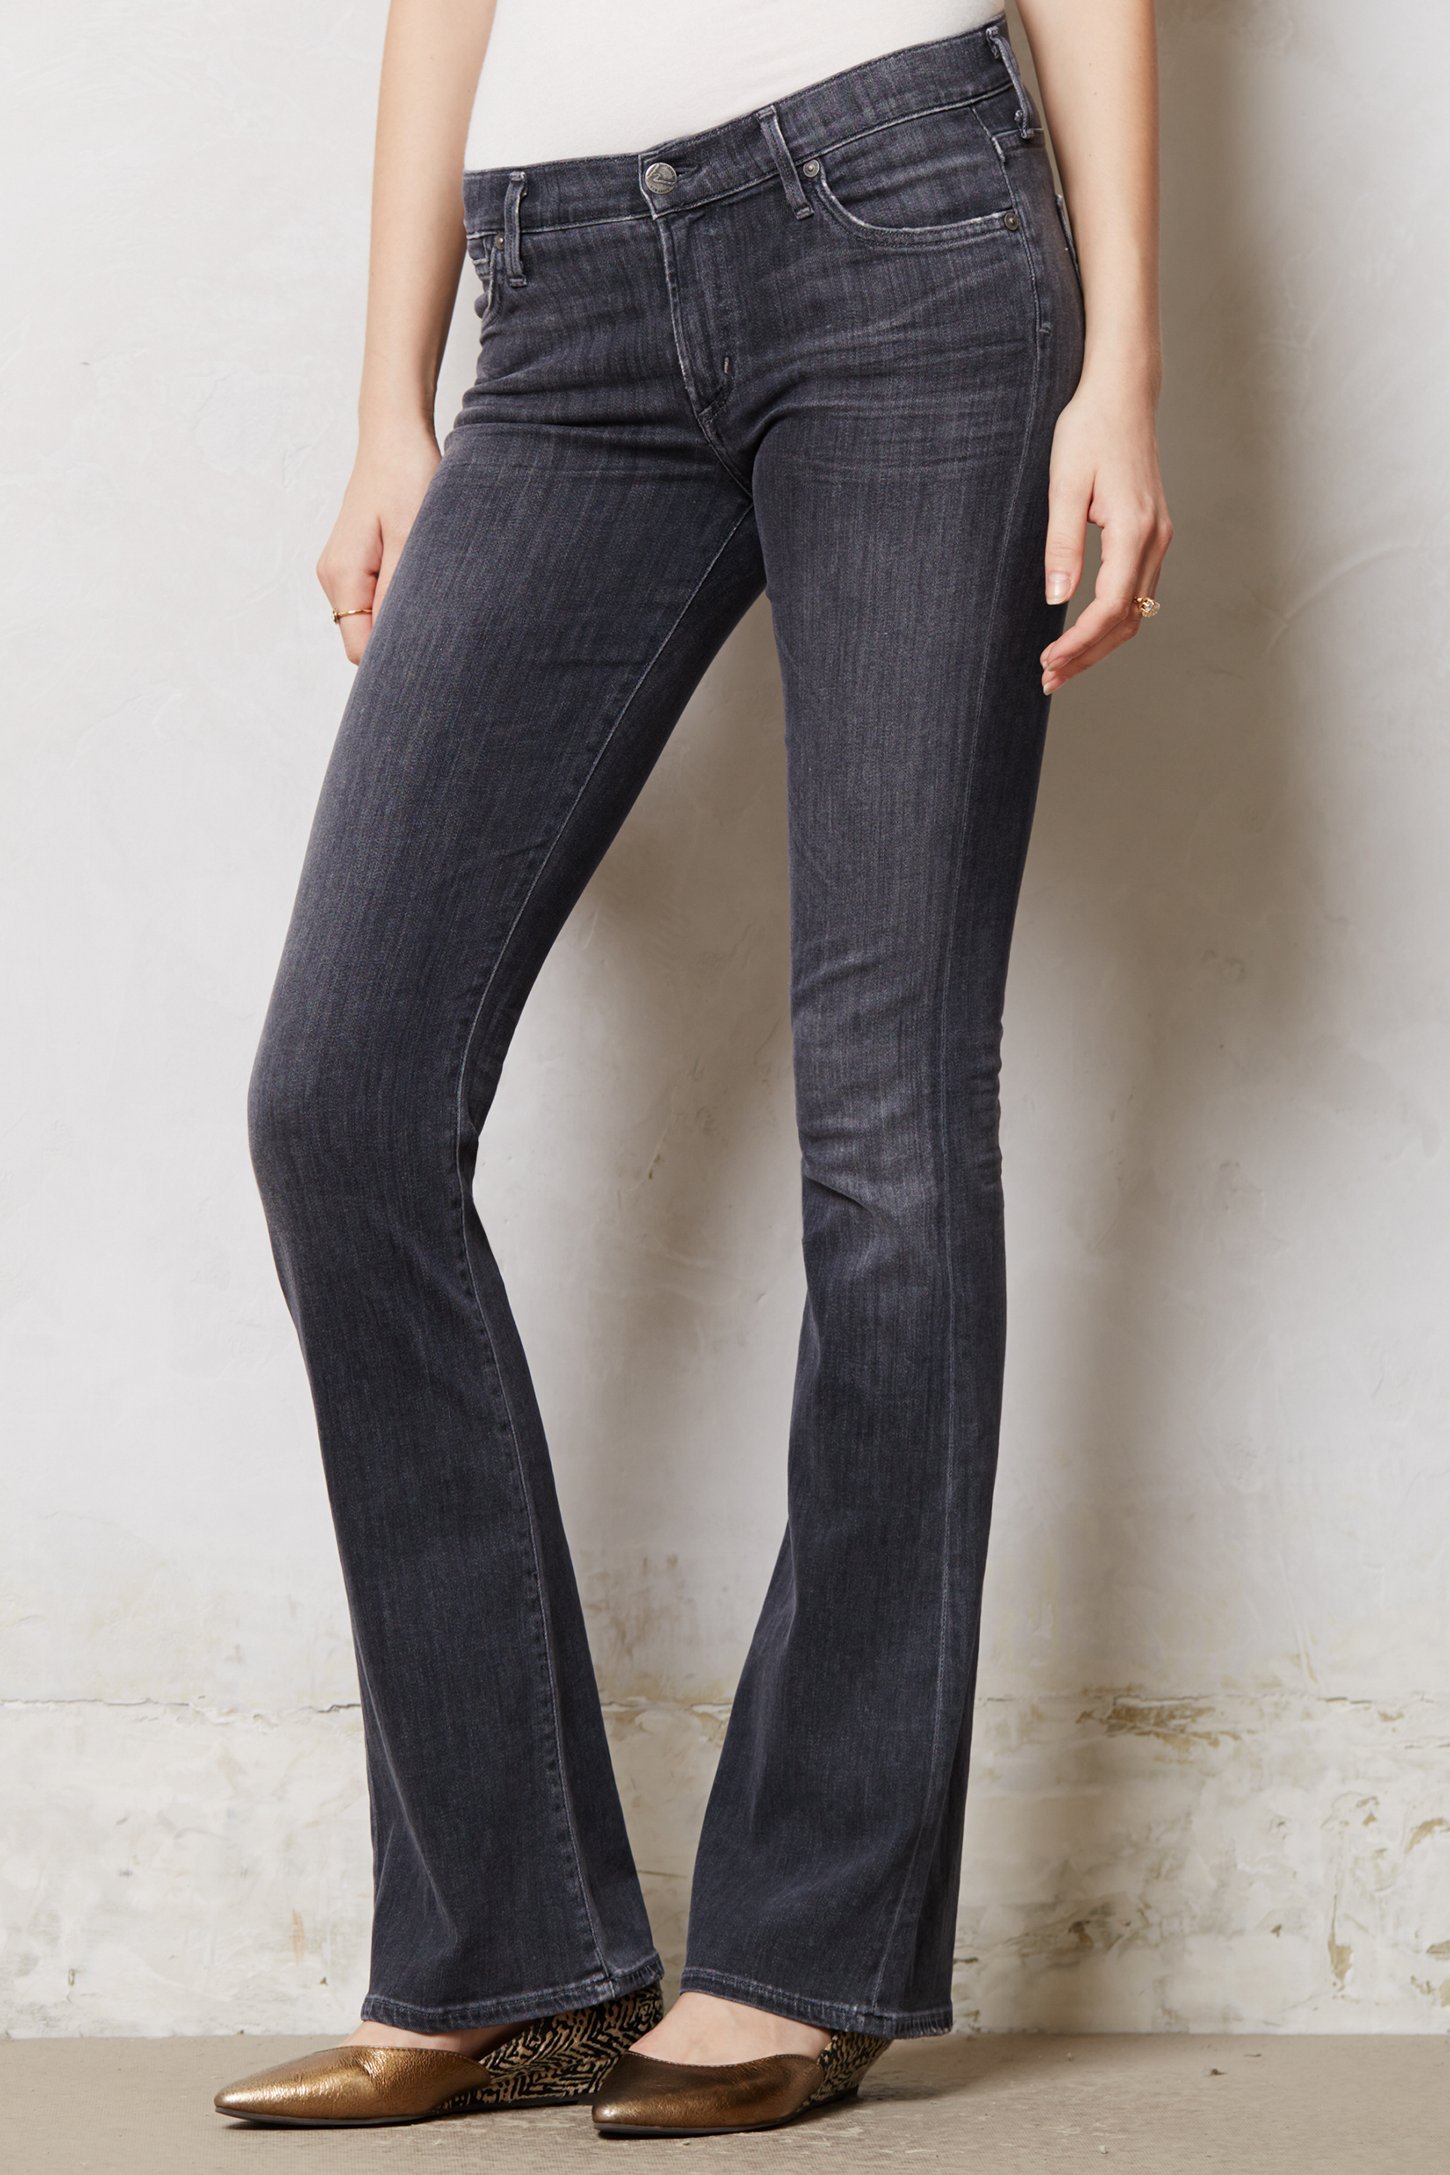 Lyst - Citizens of humanity Emmanuelle Slim Bootcut Jeans in Gray